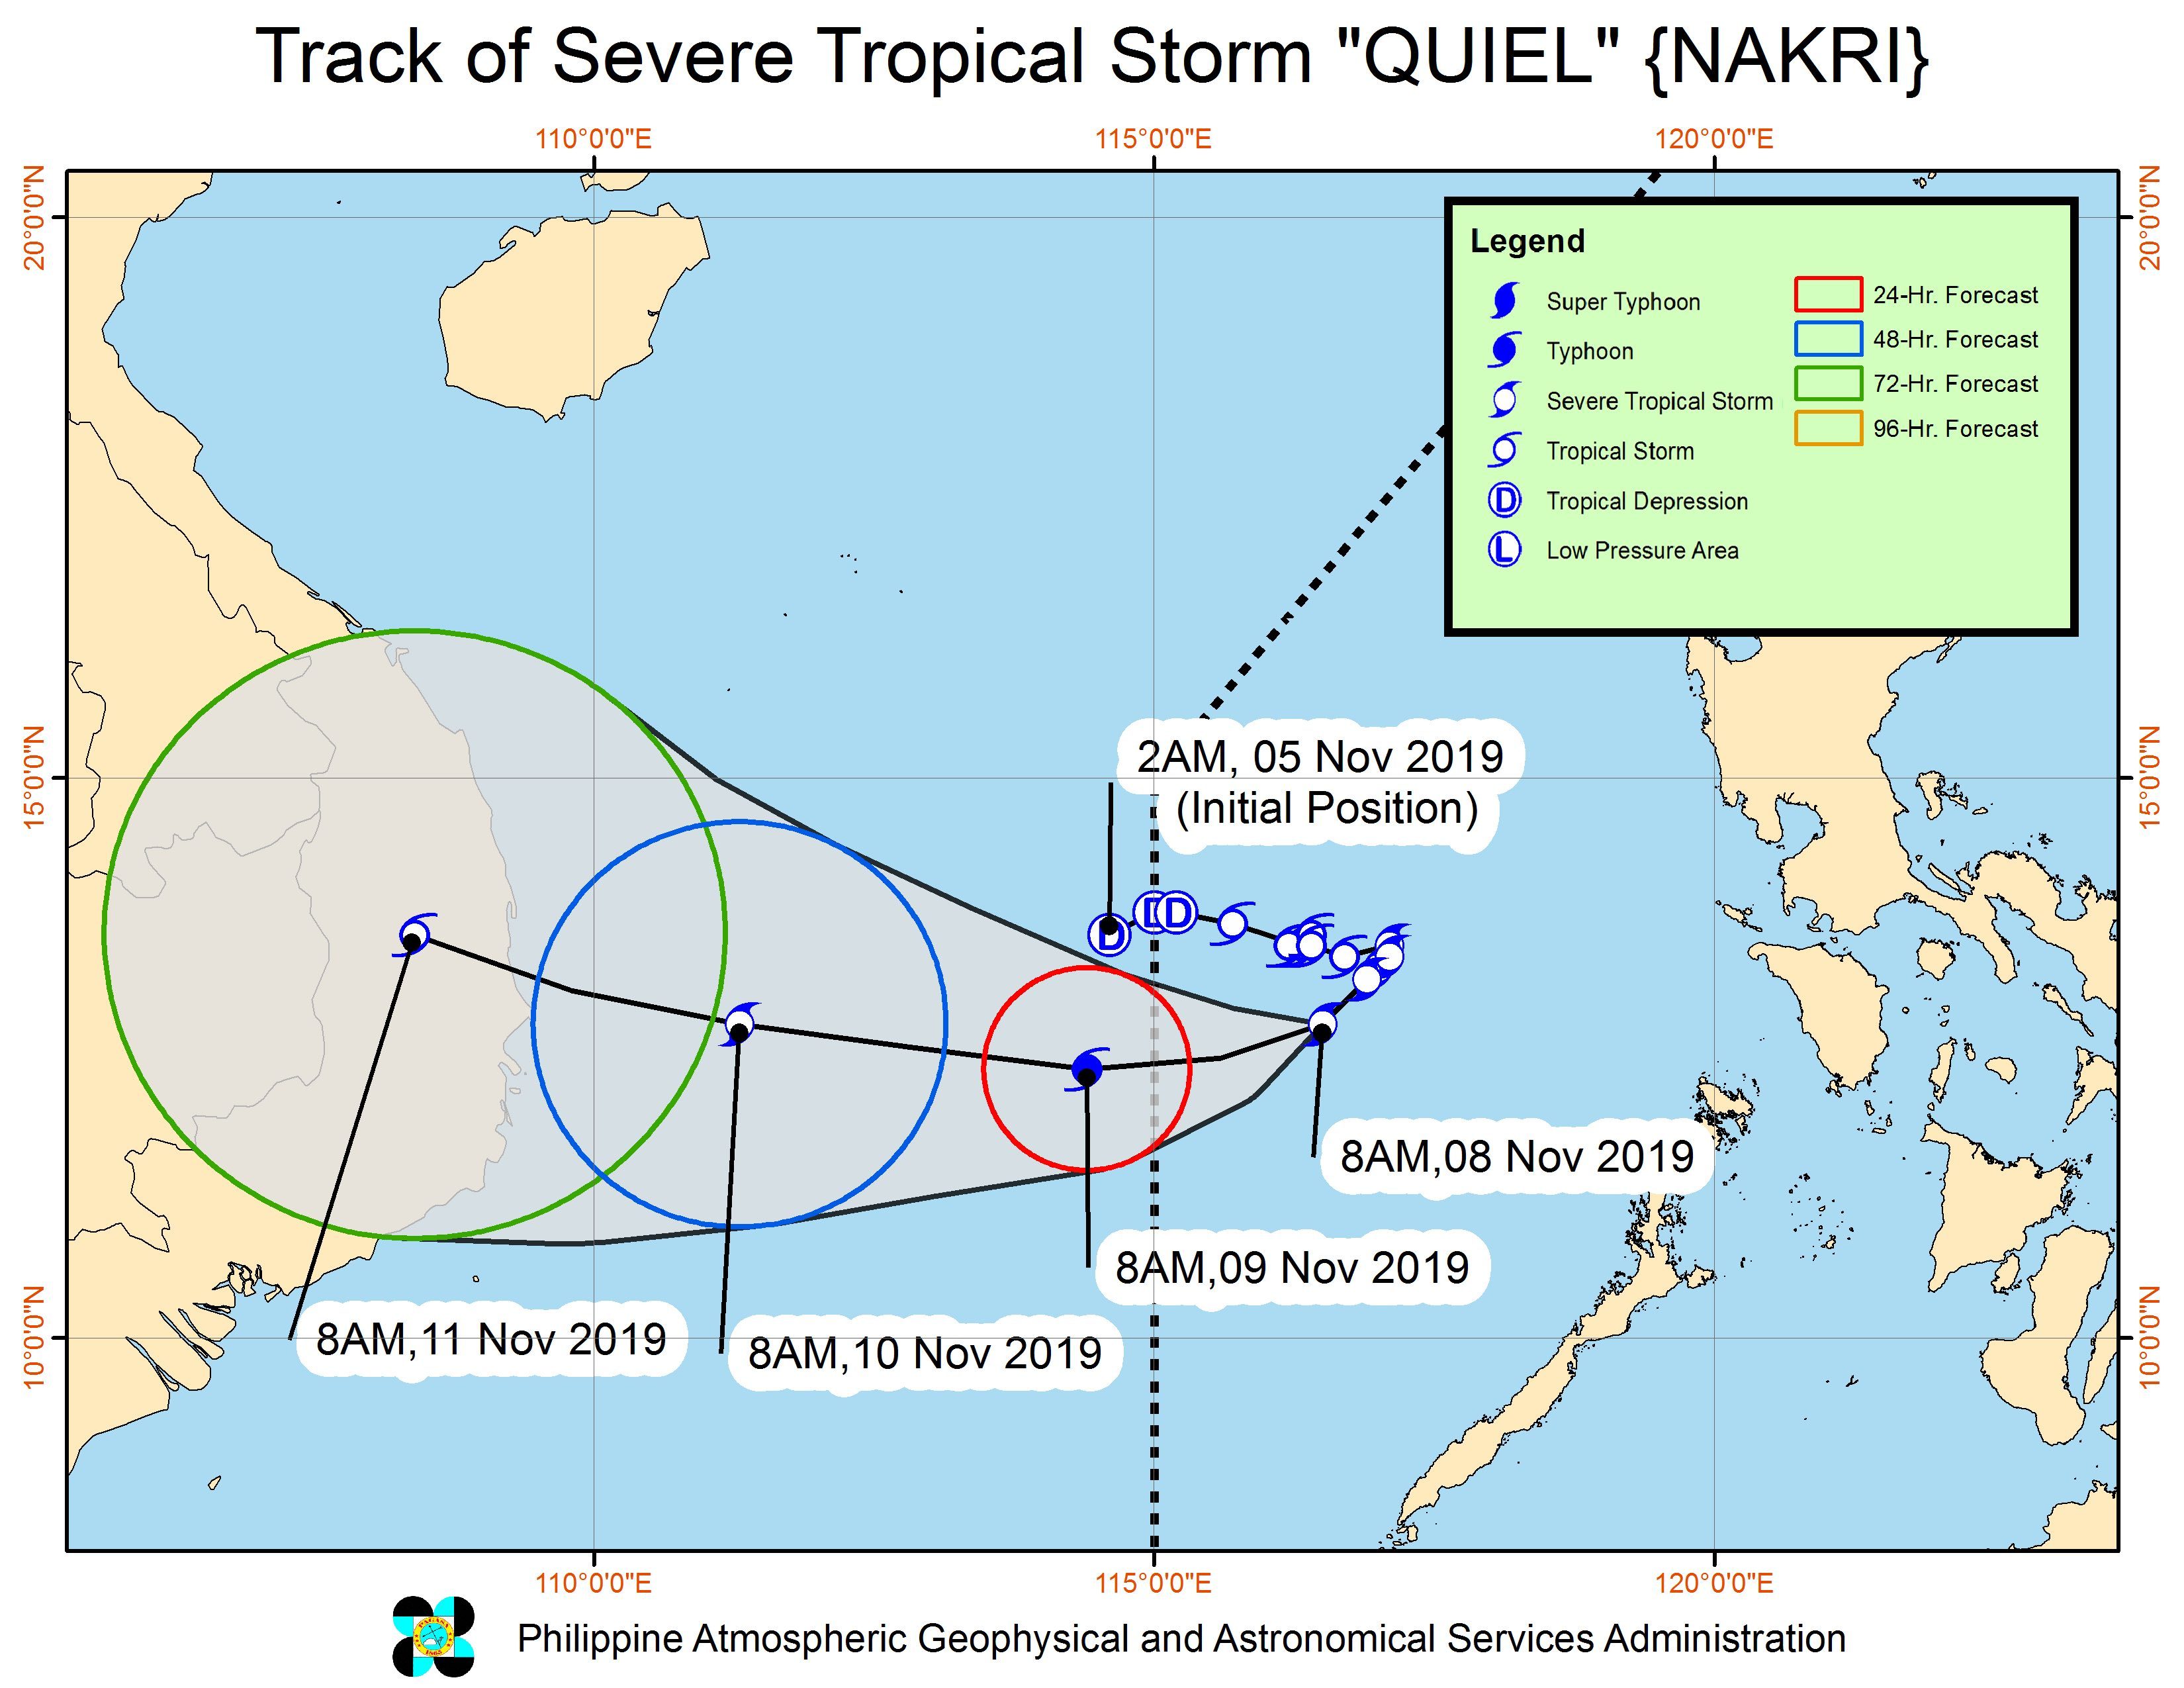 Forecast track of Severe Tropical Storm Quiel (Nakri) as of November 8, 2019, 11 am. Image from PAGASA 